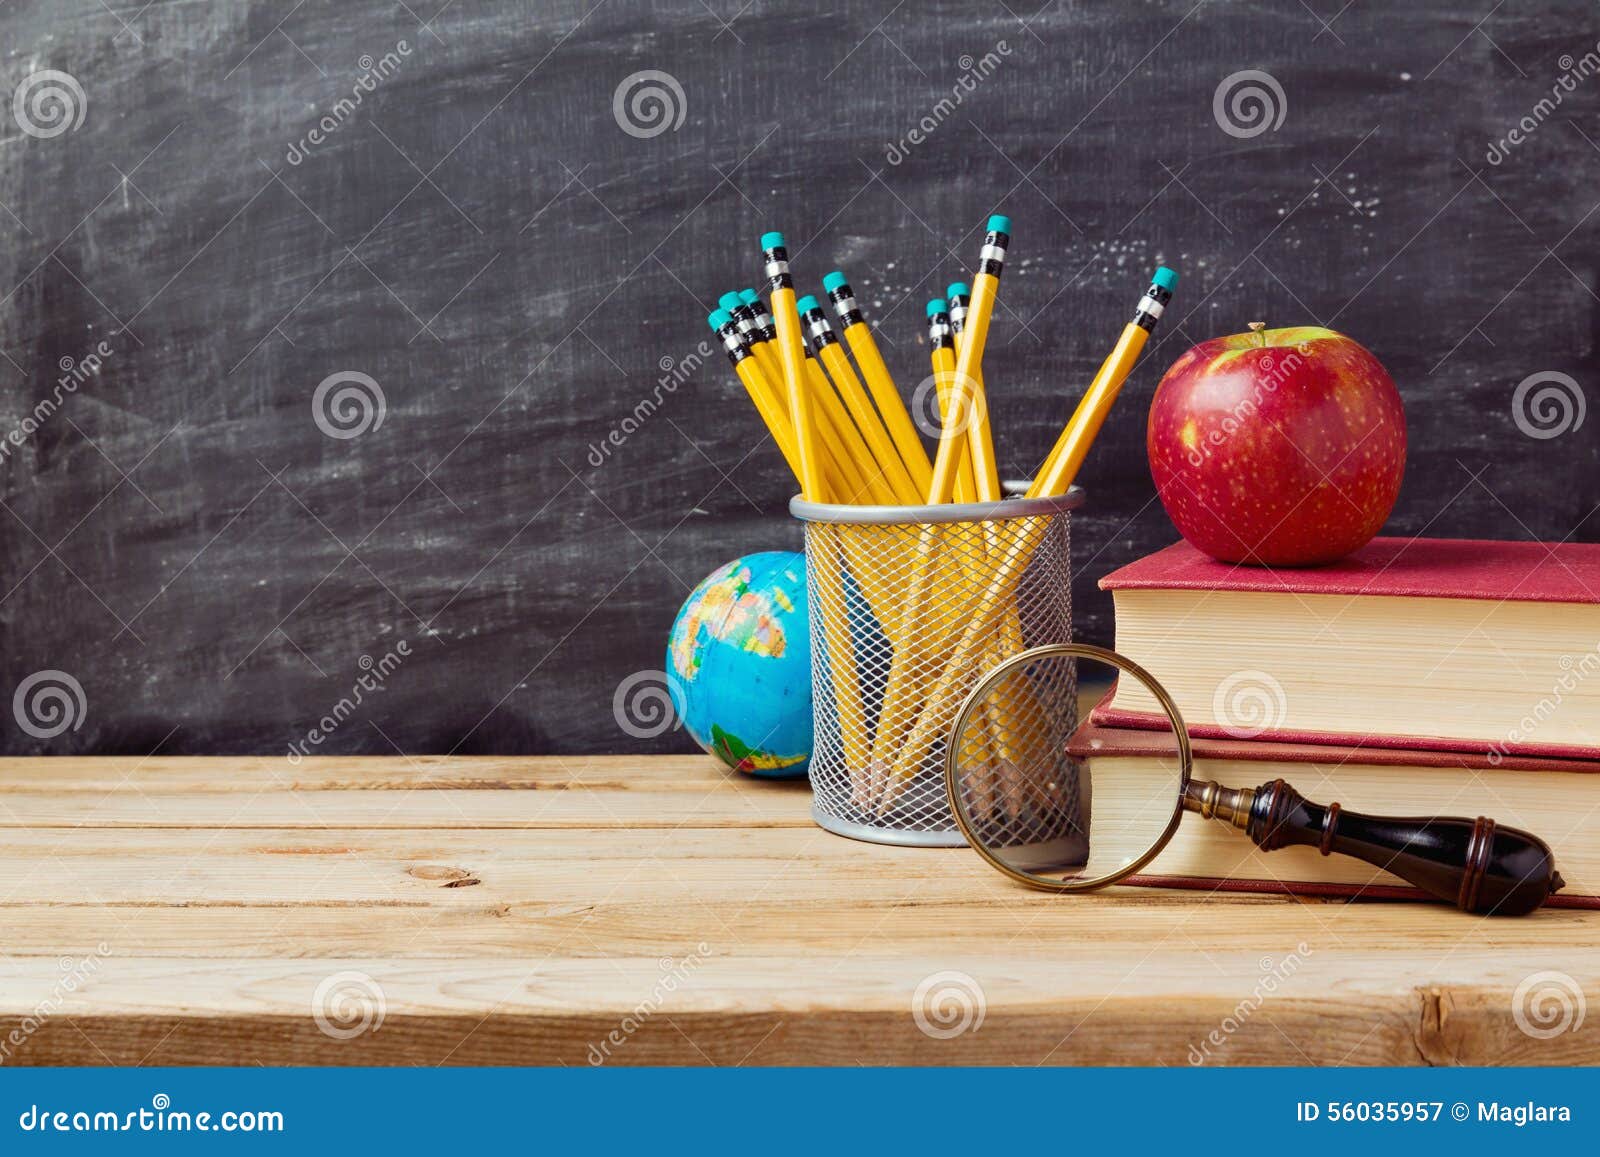 back to school background with teachers objects over chalkboard